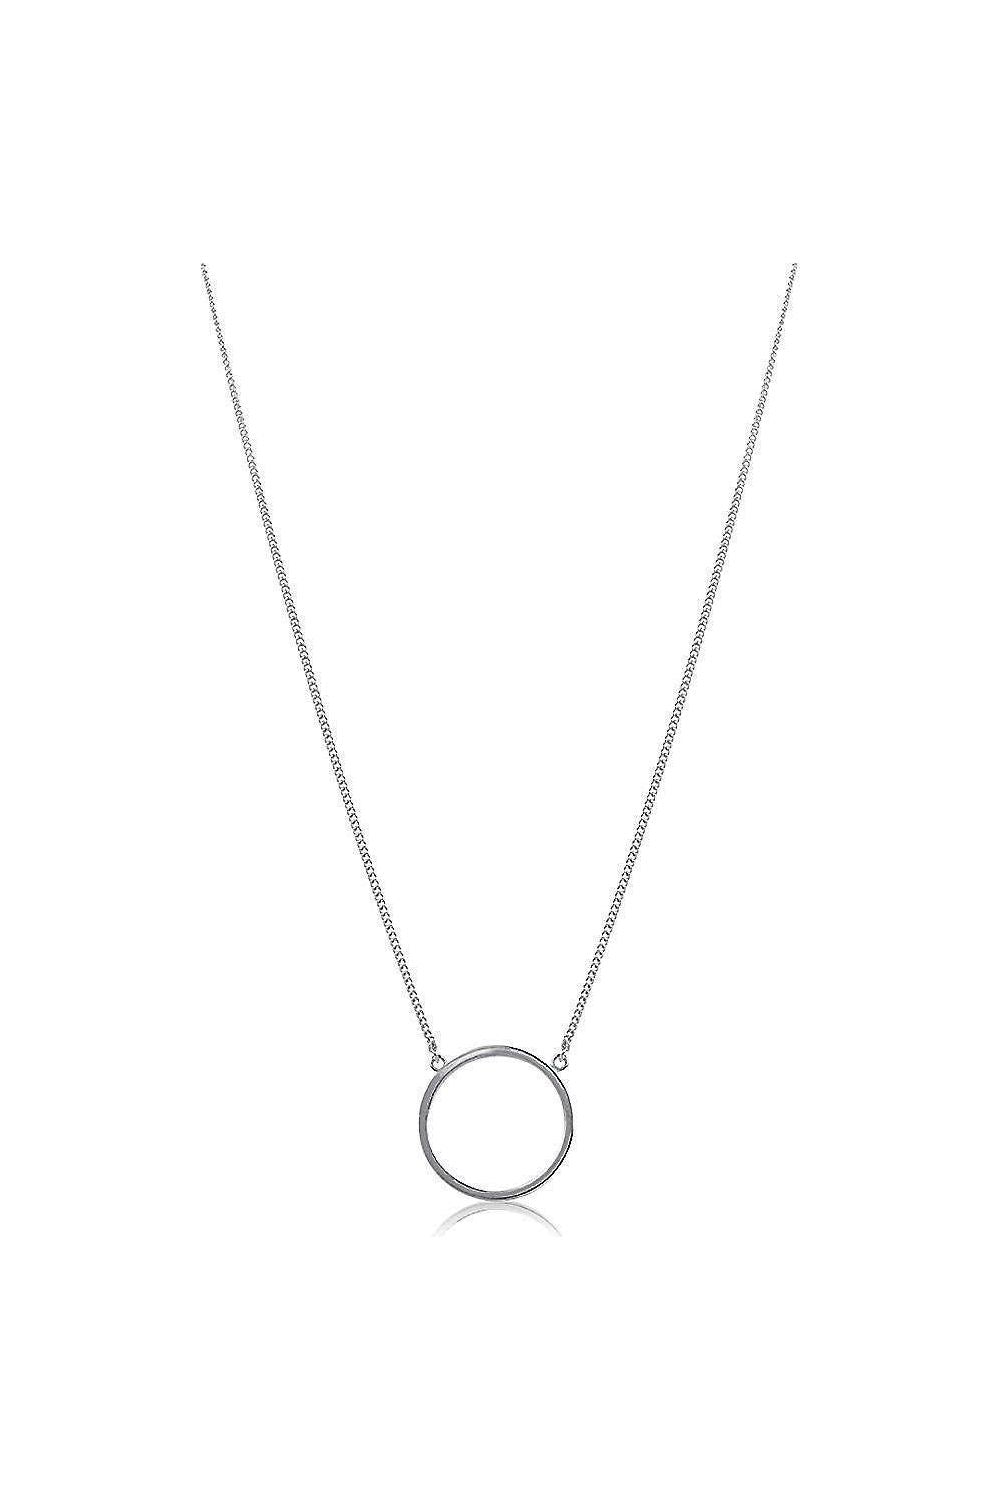 Hollow circle necklace